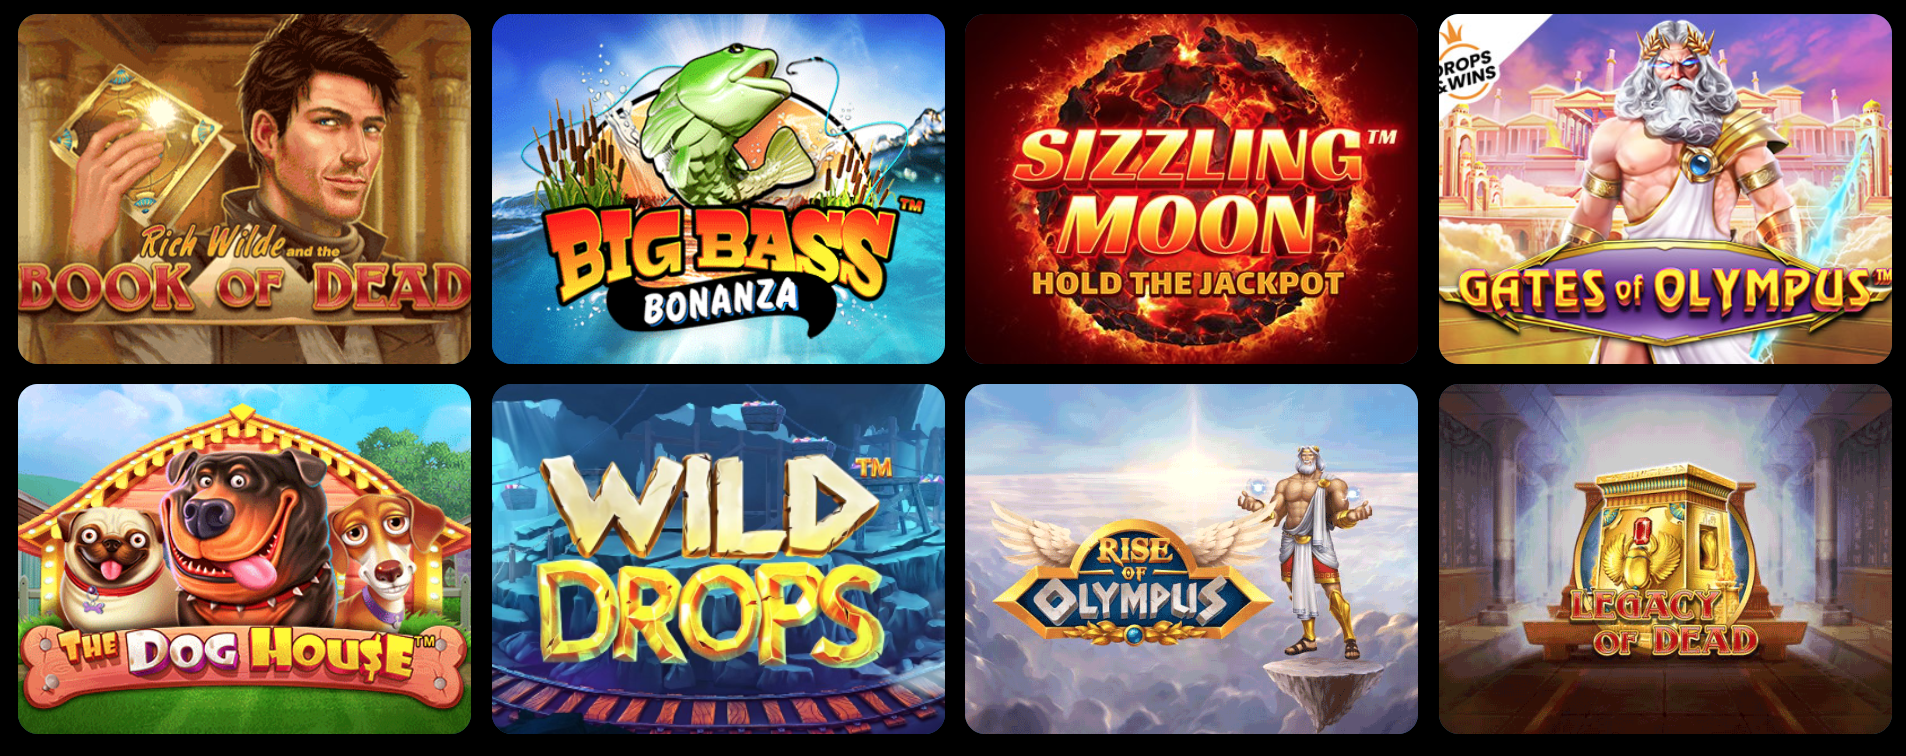 sons of slots casino review spelaanbod